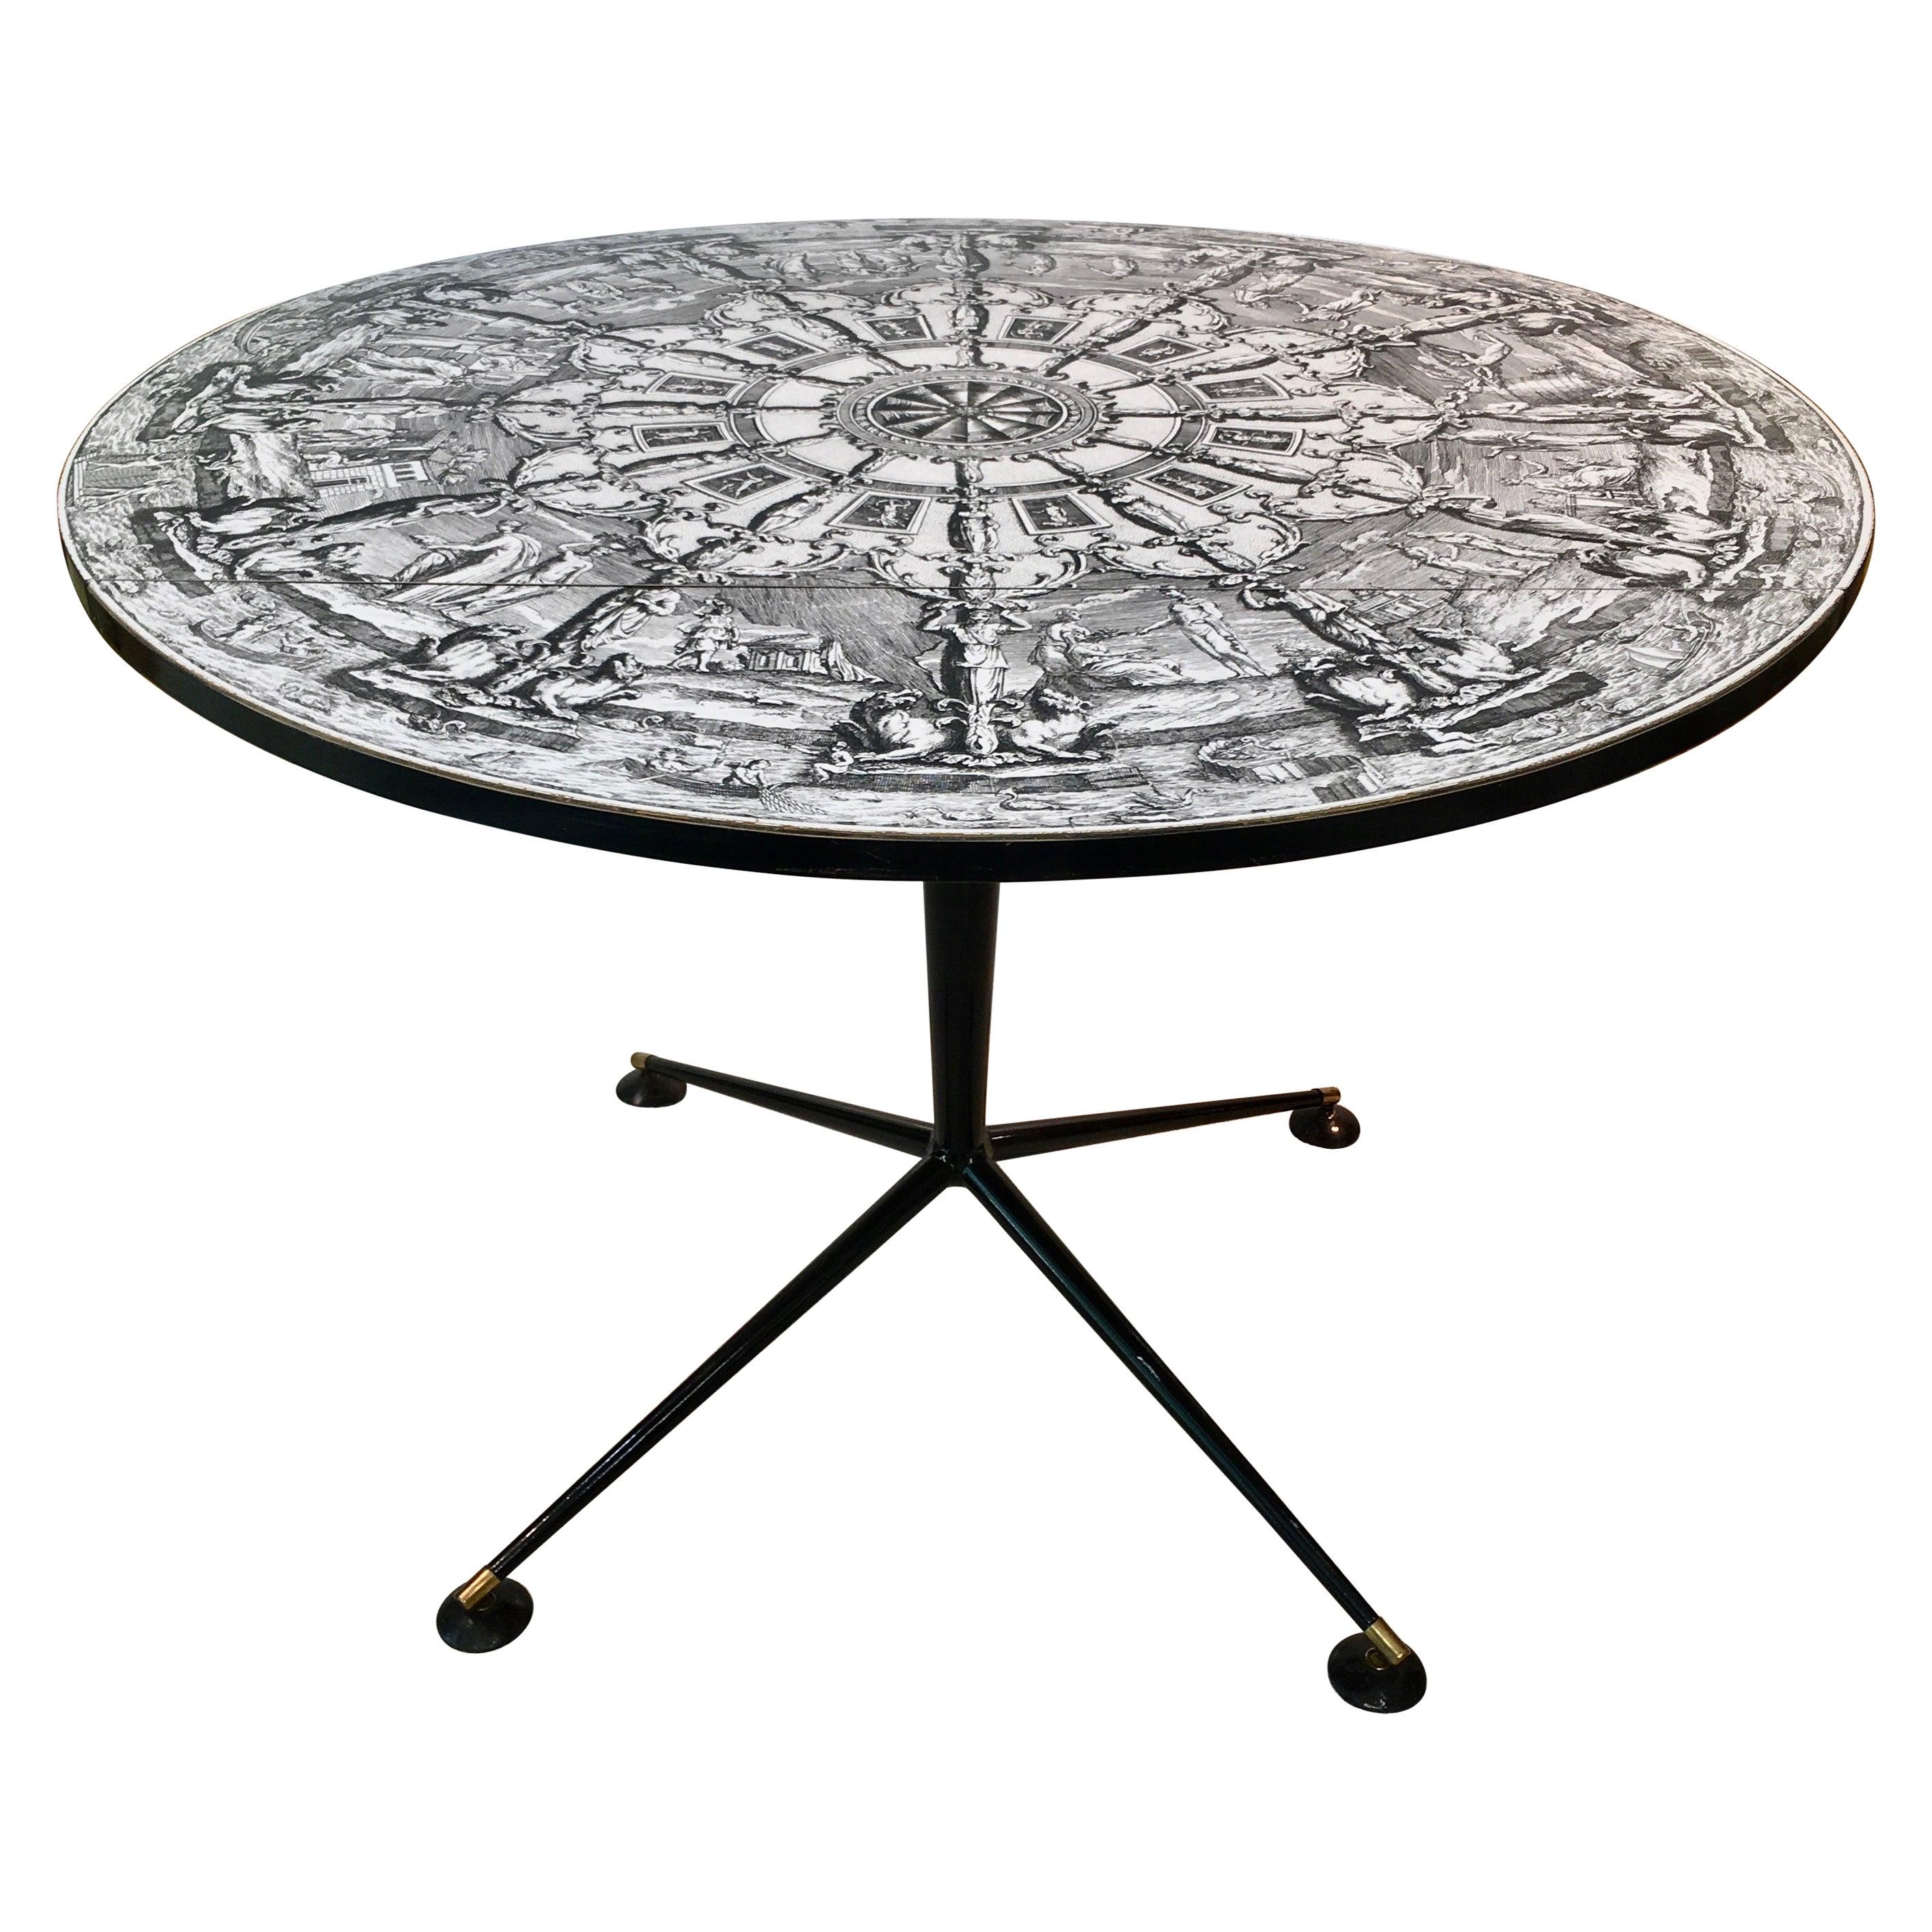 Andrew J. Milne for Heal's Round Drop Leaf Table